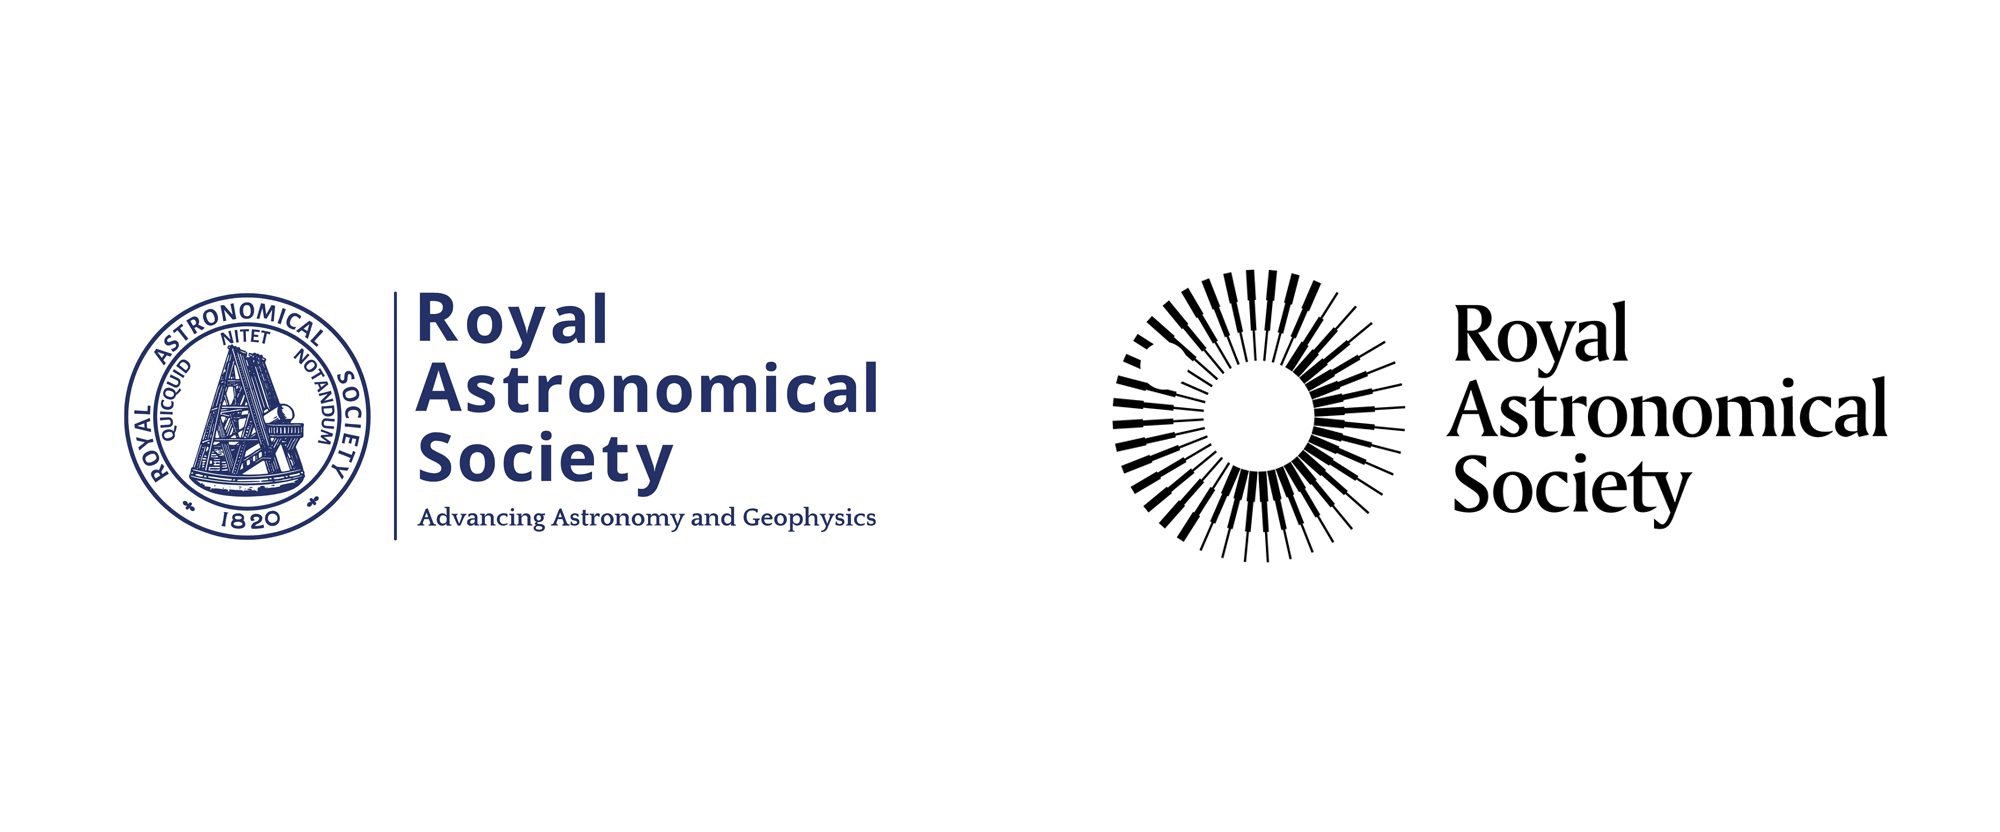 New Logo and Identity for Royal Astronomical Society by Johnson Banks